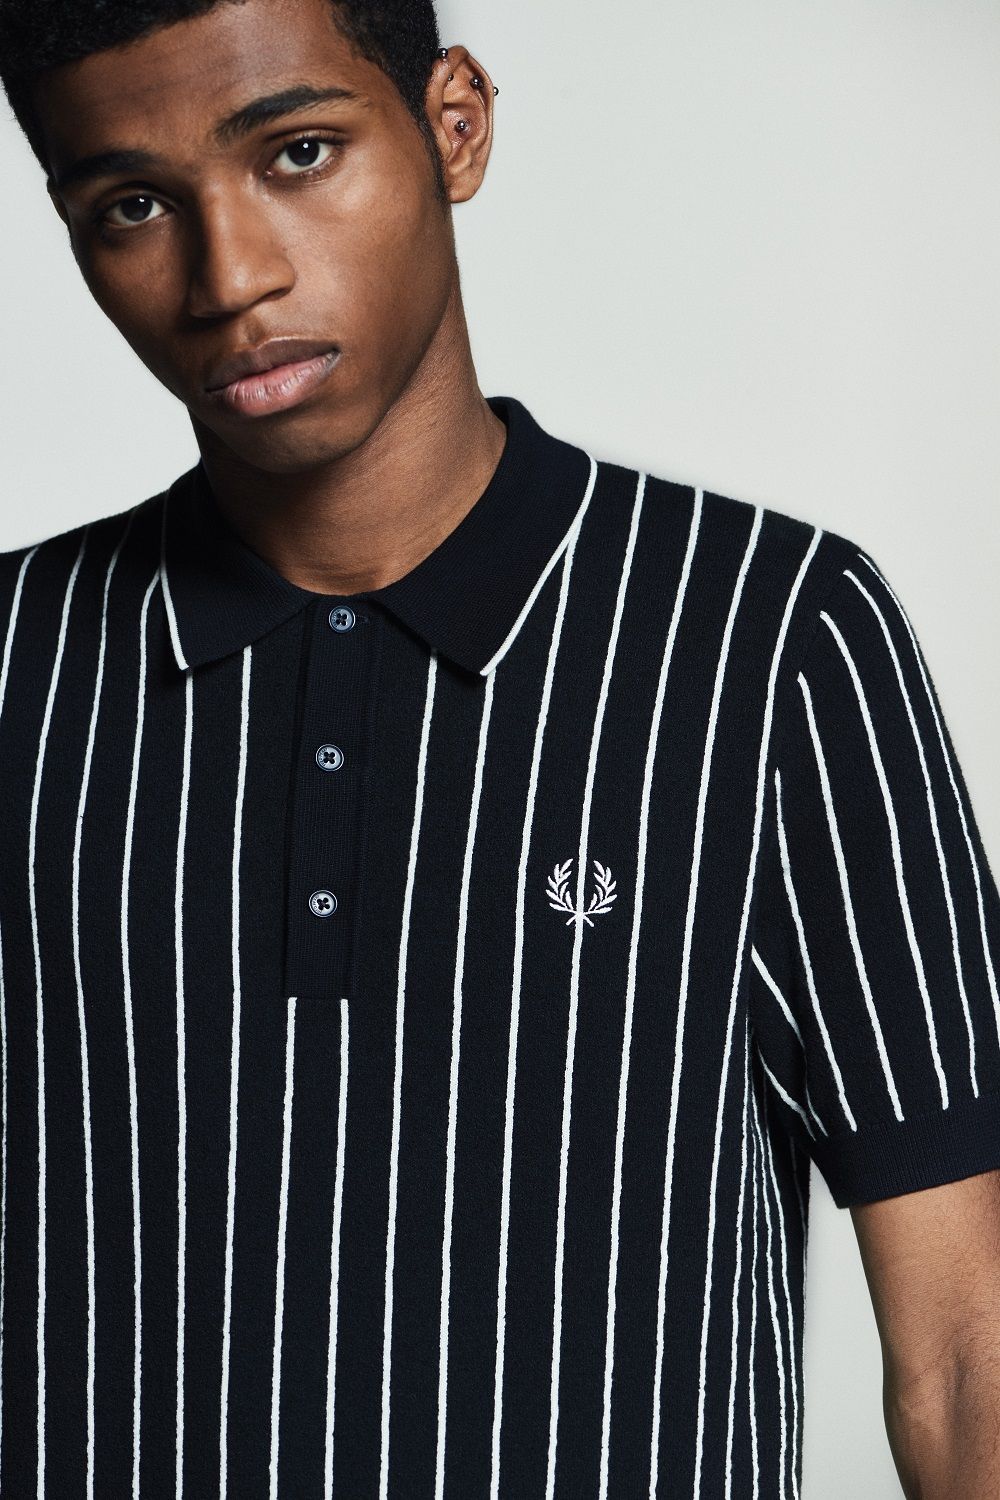 SHARP BY FRED PERRY COLLECTION • MVC Magazine